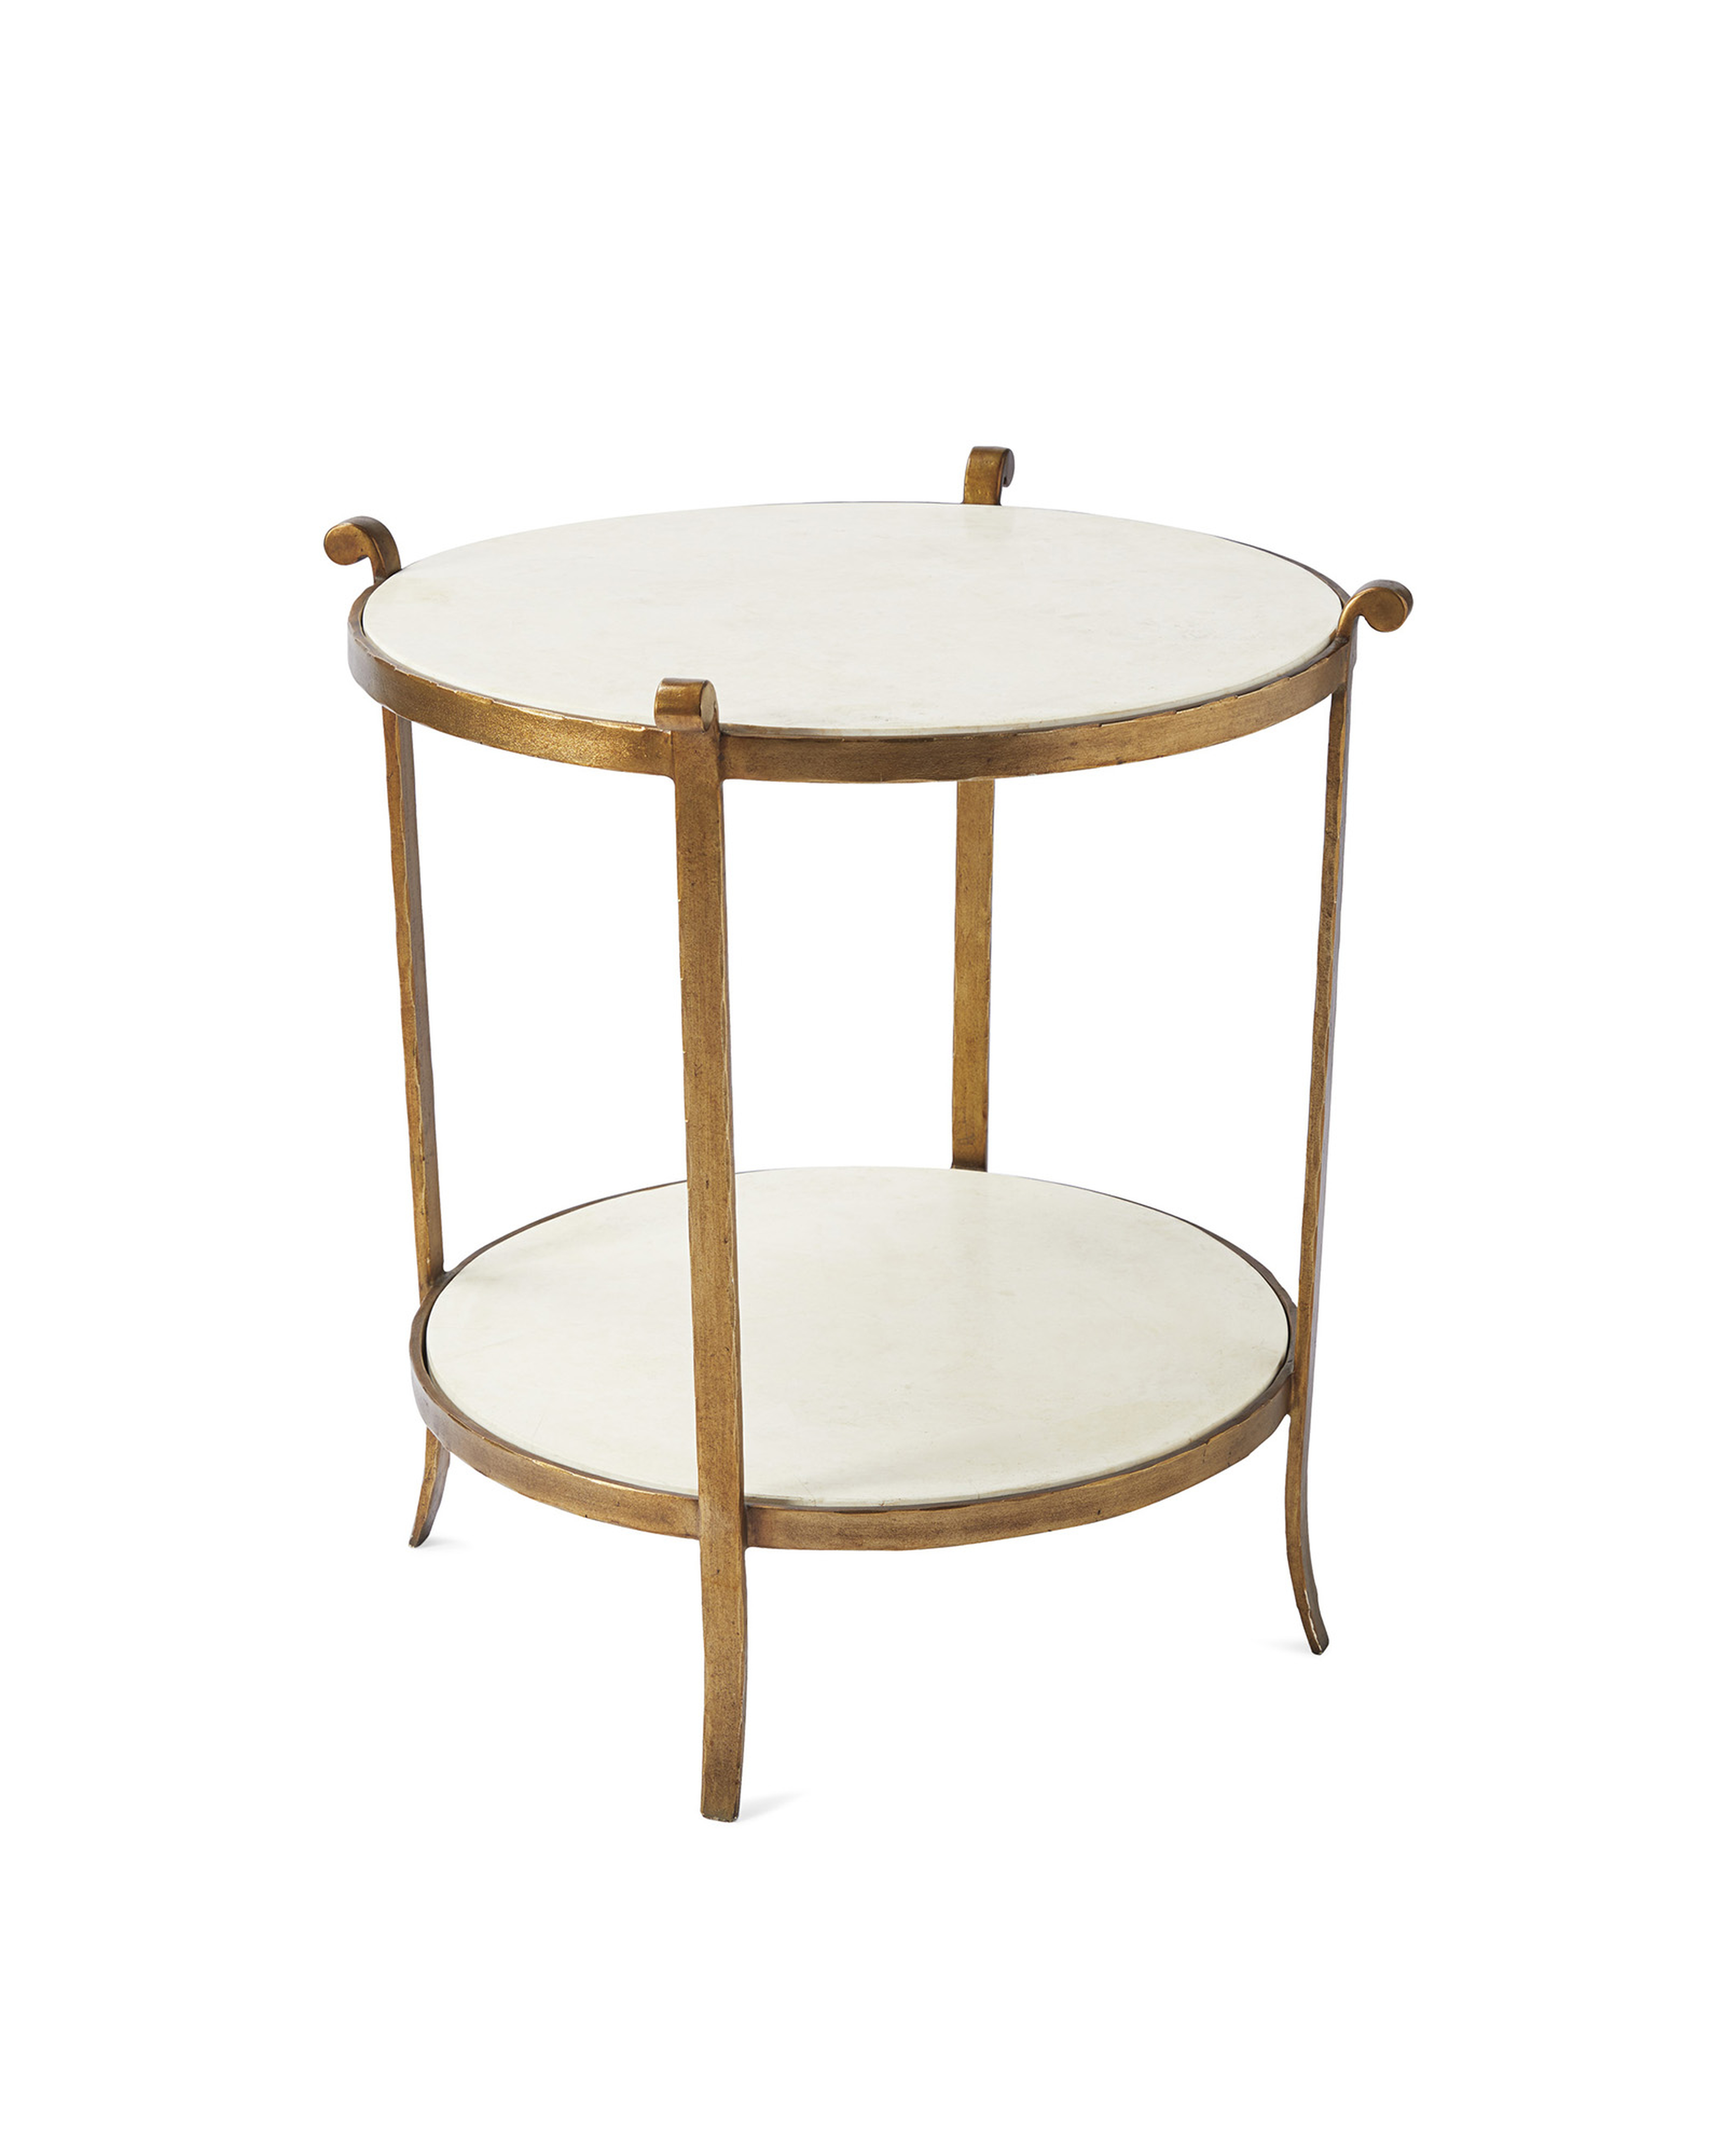 St. Germain Round Side Table - Serena and Lily